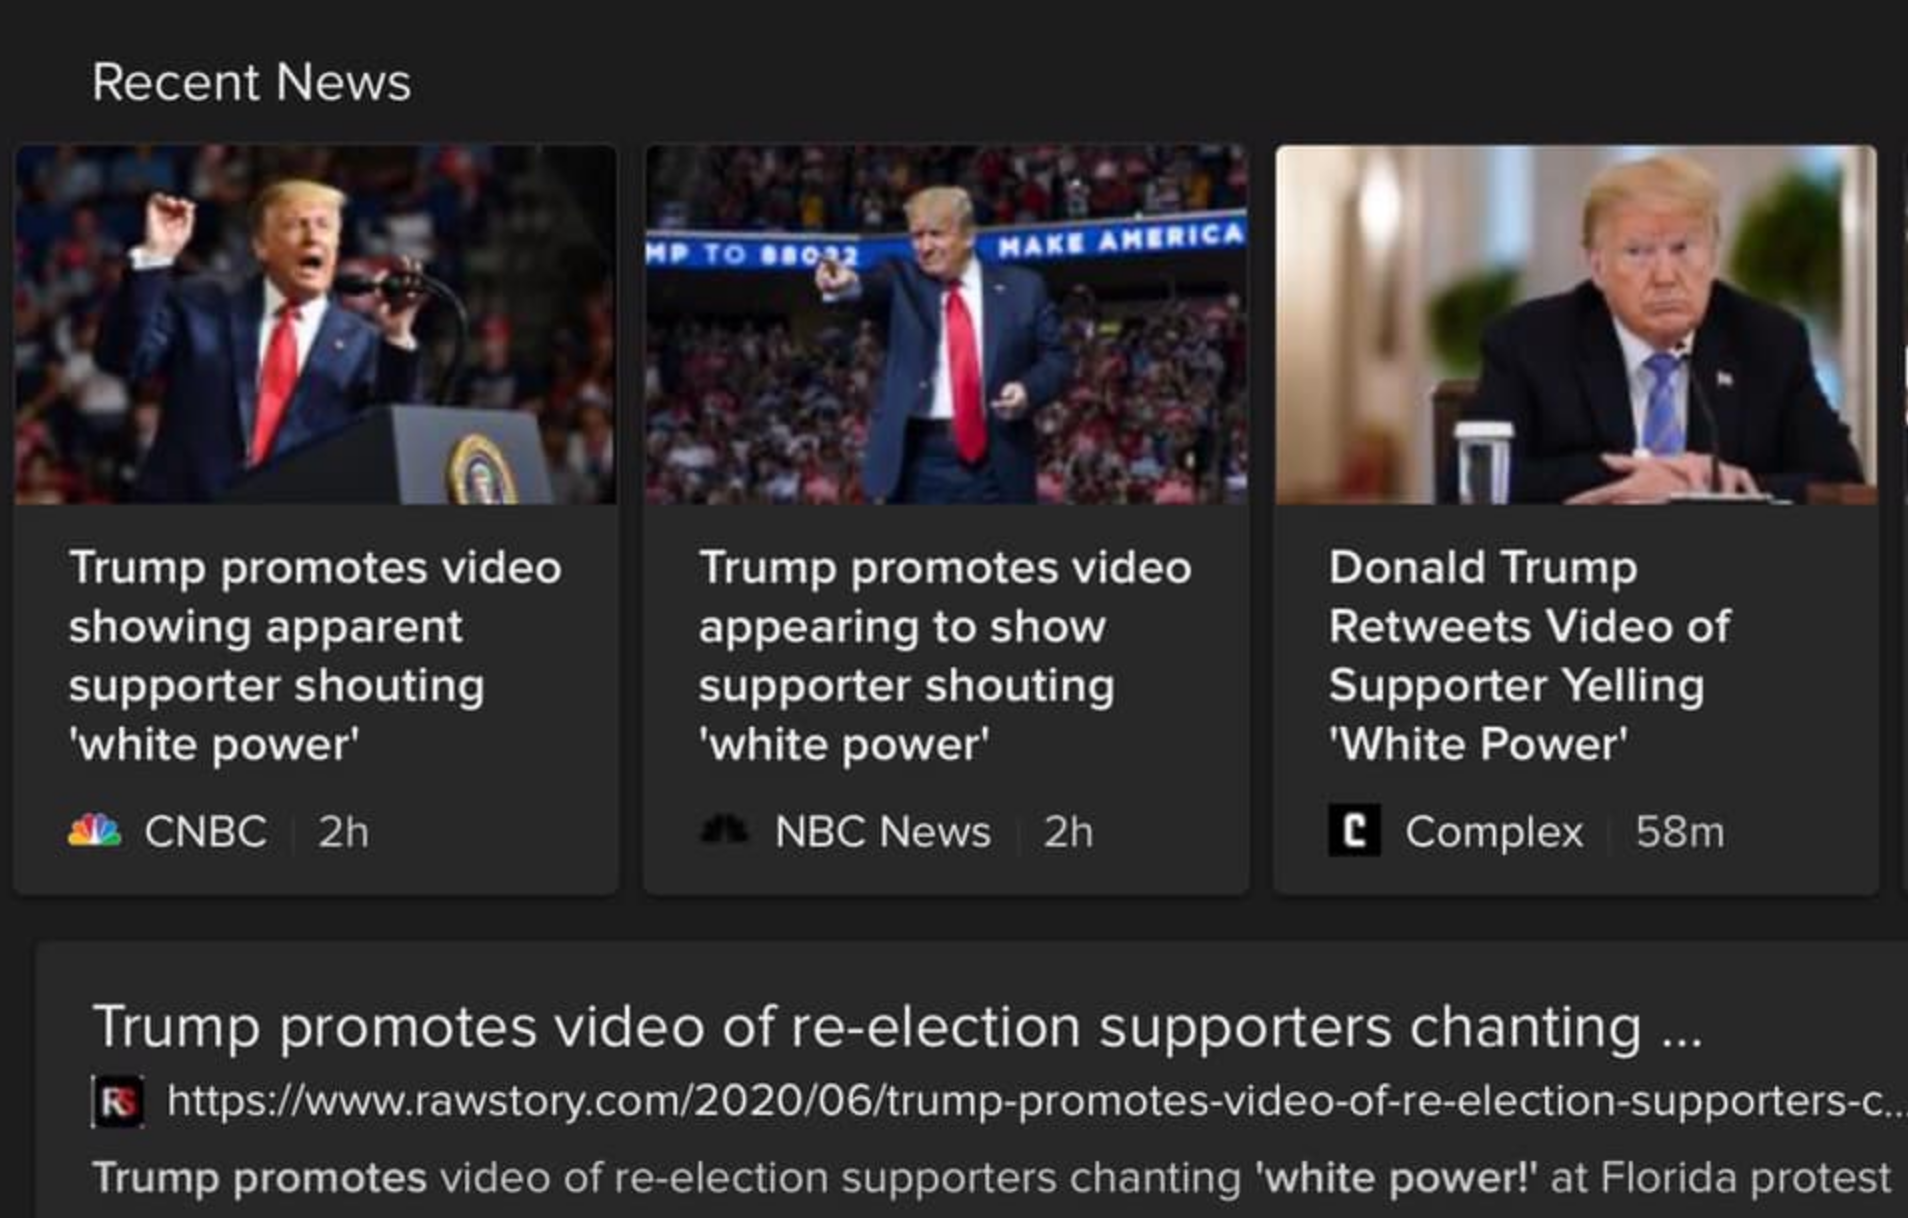 Trump Promotes Video Showing Apparent Supporter Shouting 'White Power'